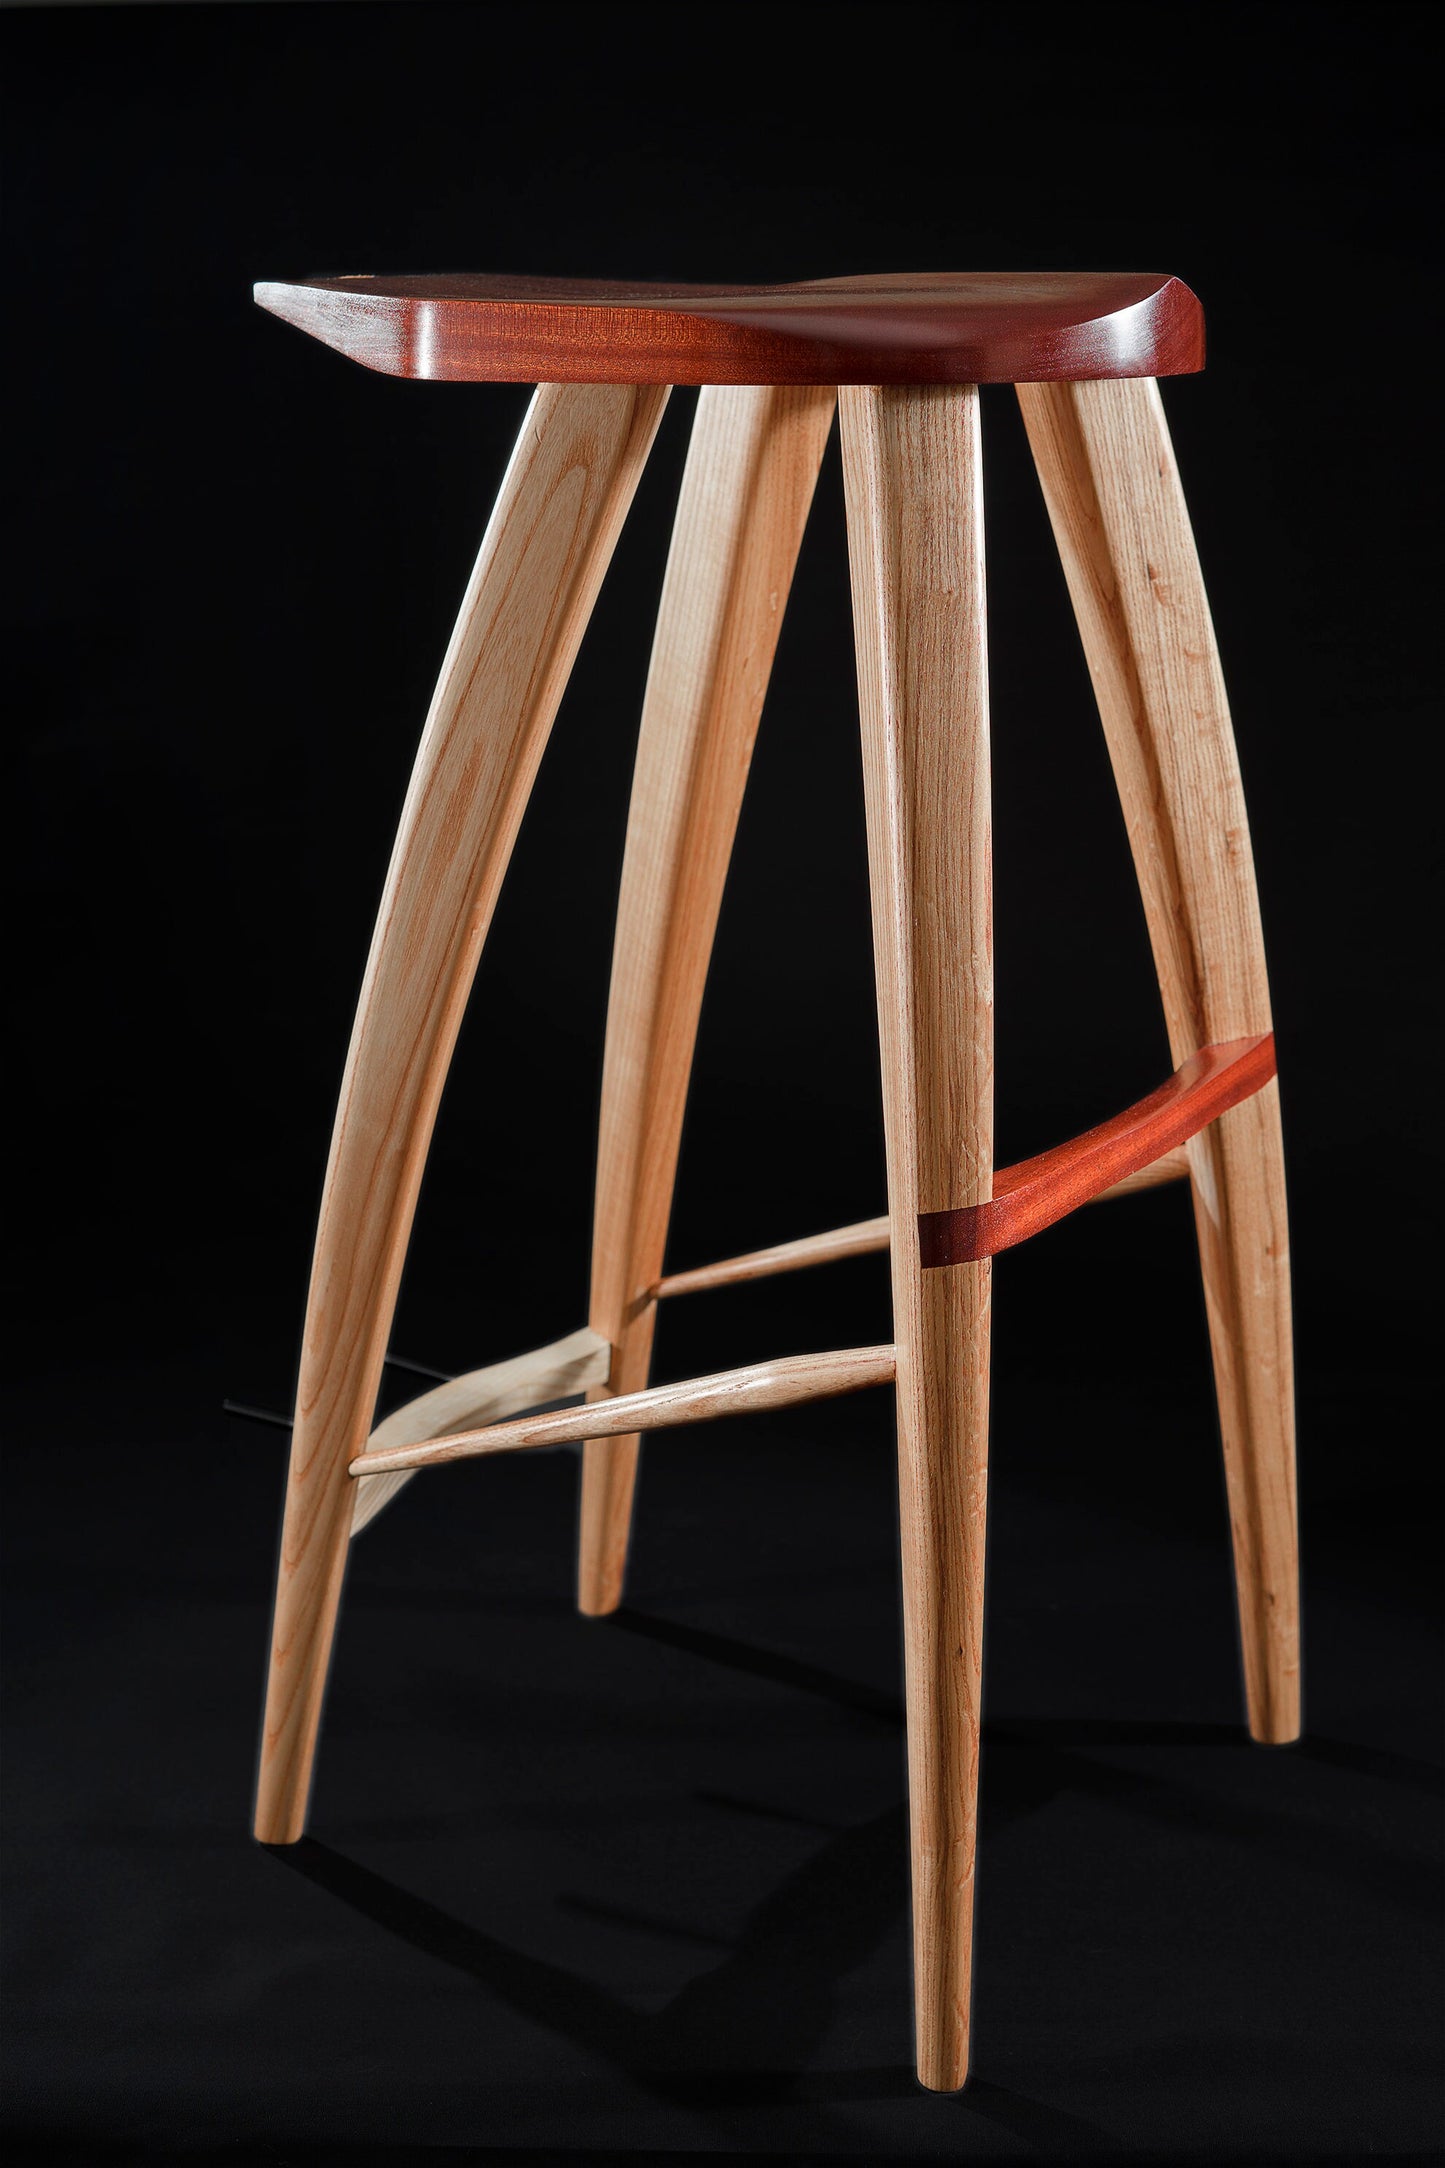 Guitar stool / stand hand carved by M-ski